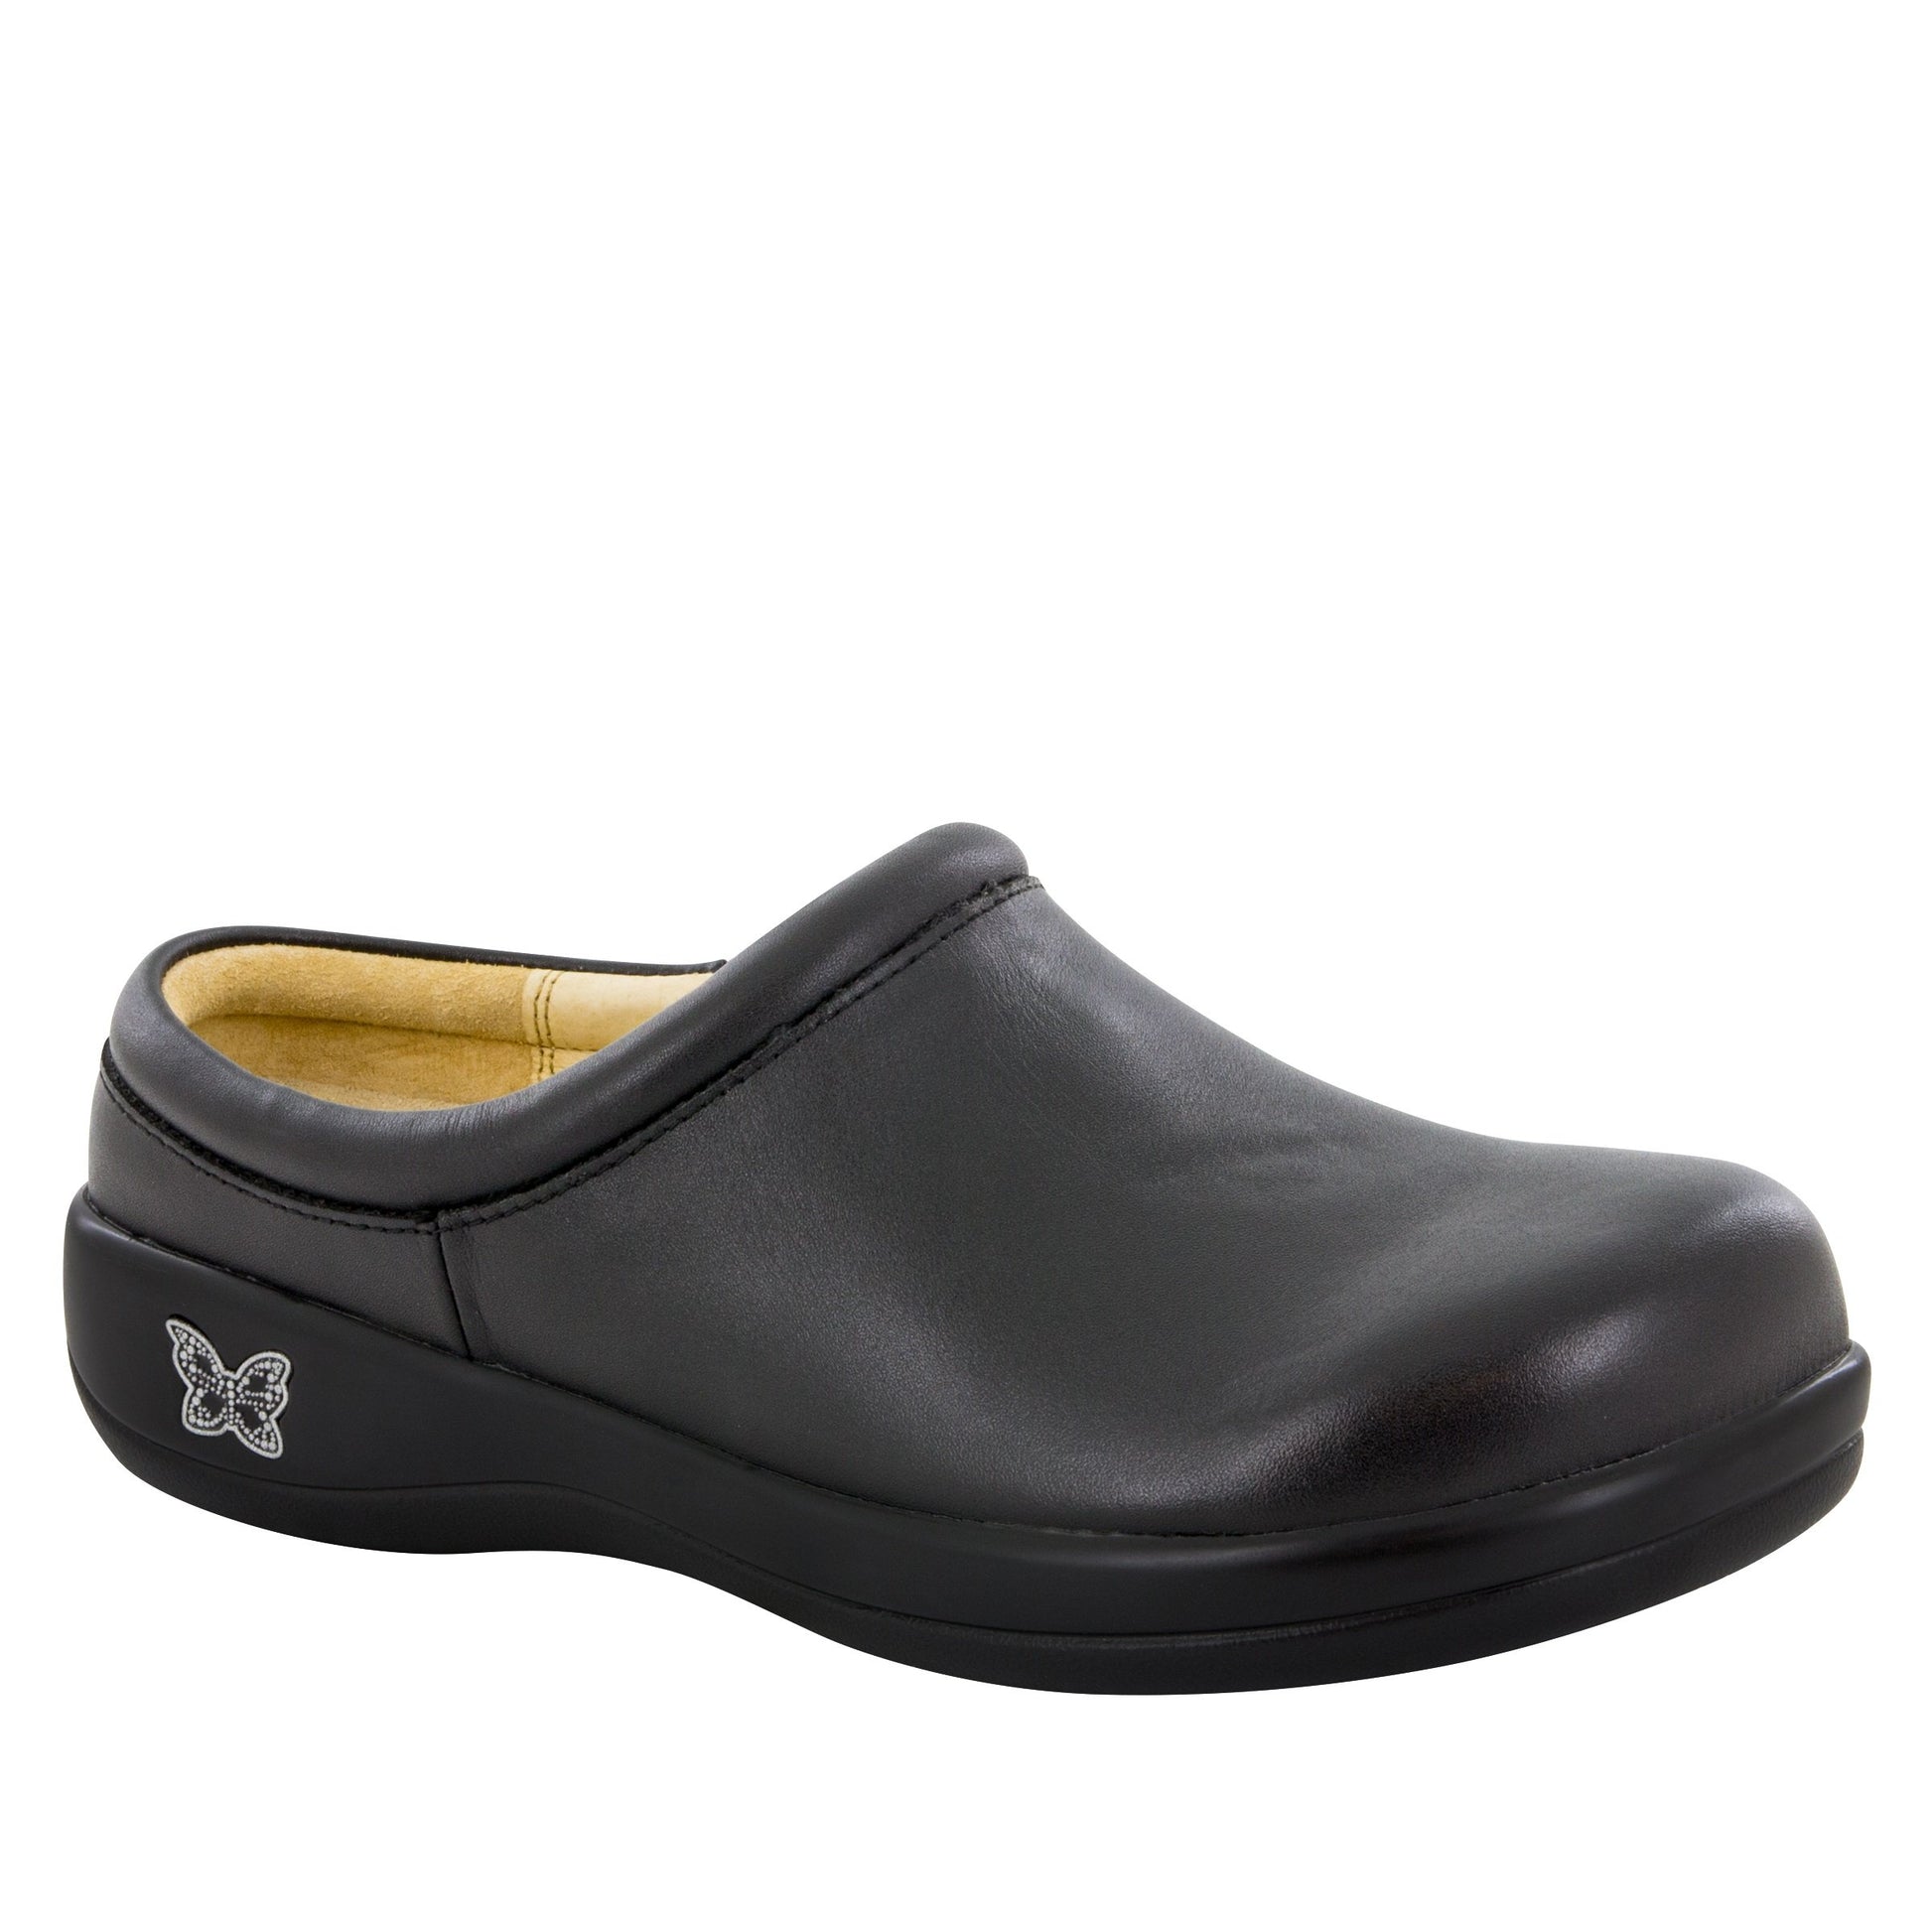 Alegria Sale Shoe Size 36 Kayla Professional Jubilee at Parker's Clothing and Shoes.